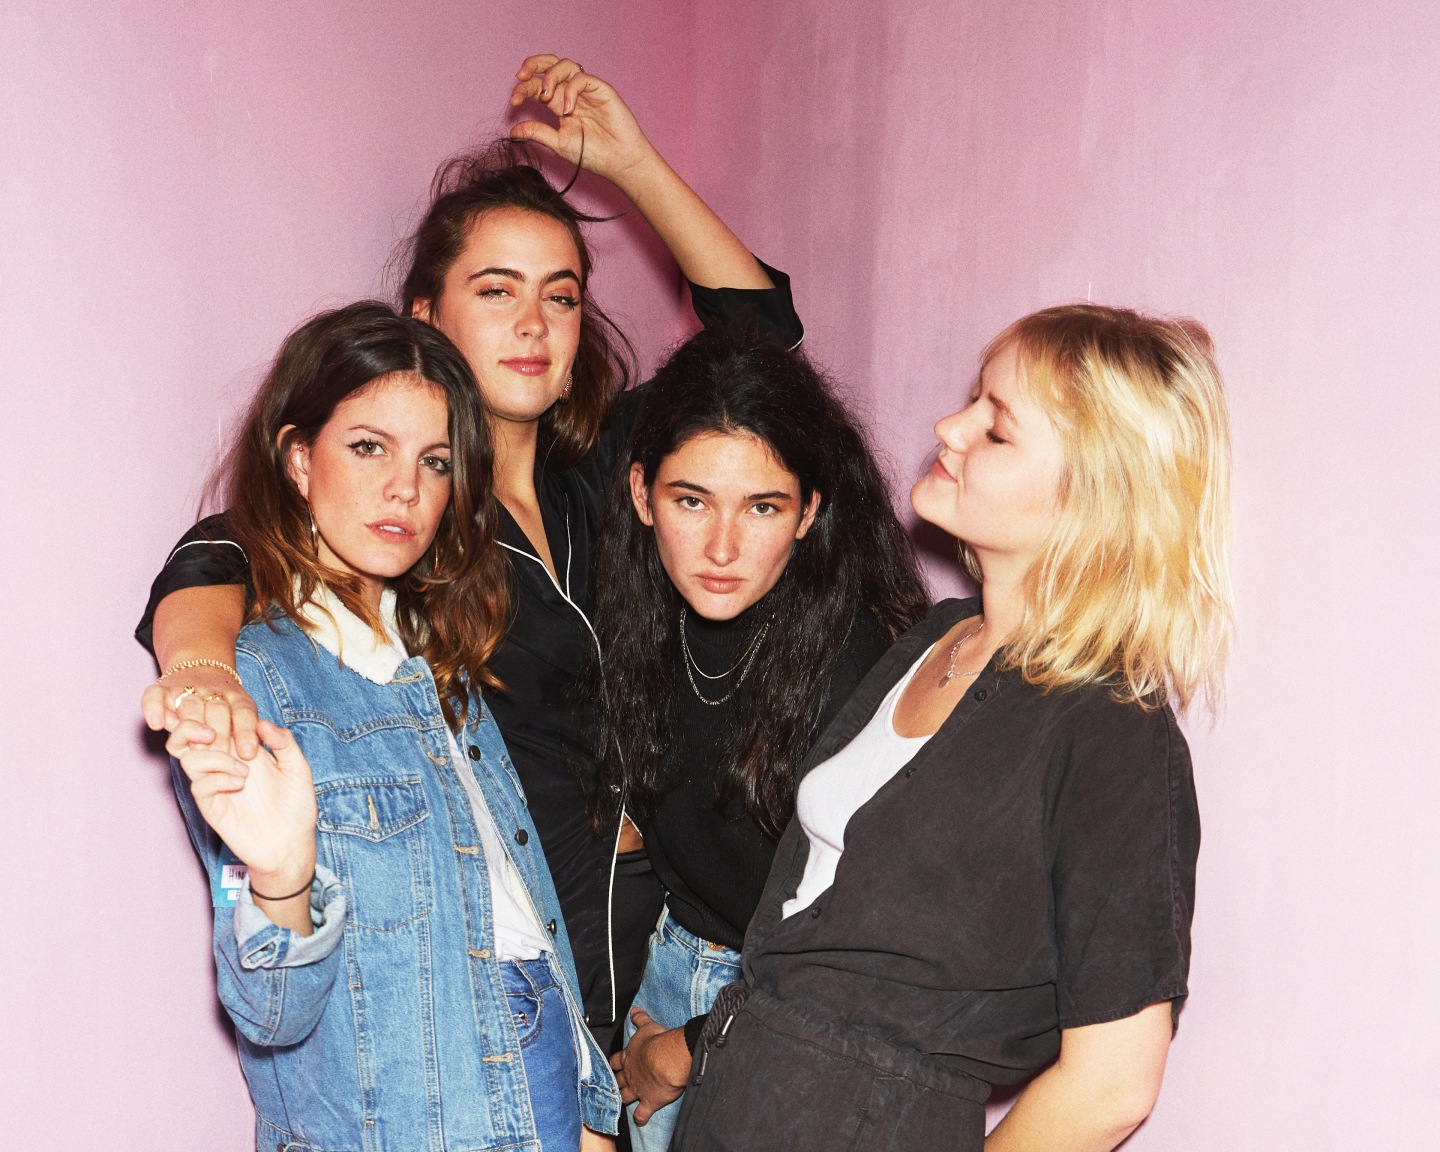 Catching up with Hinds